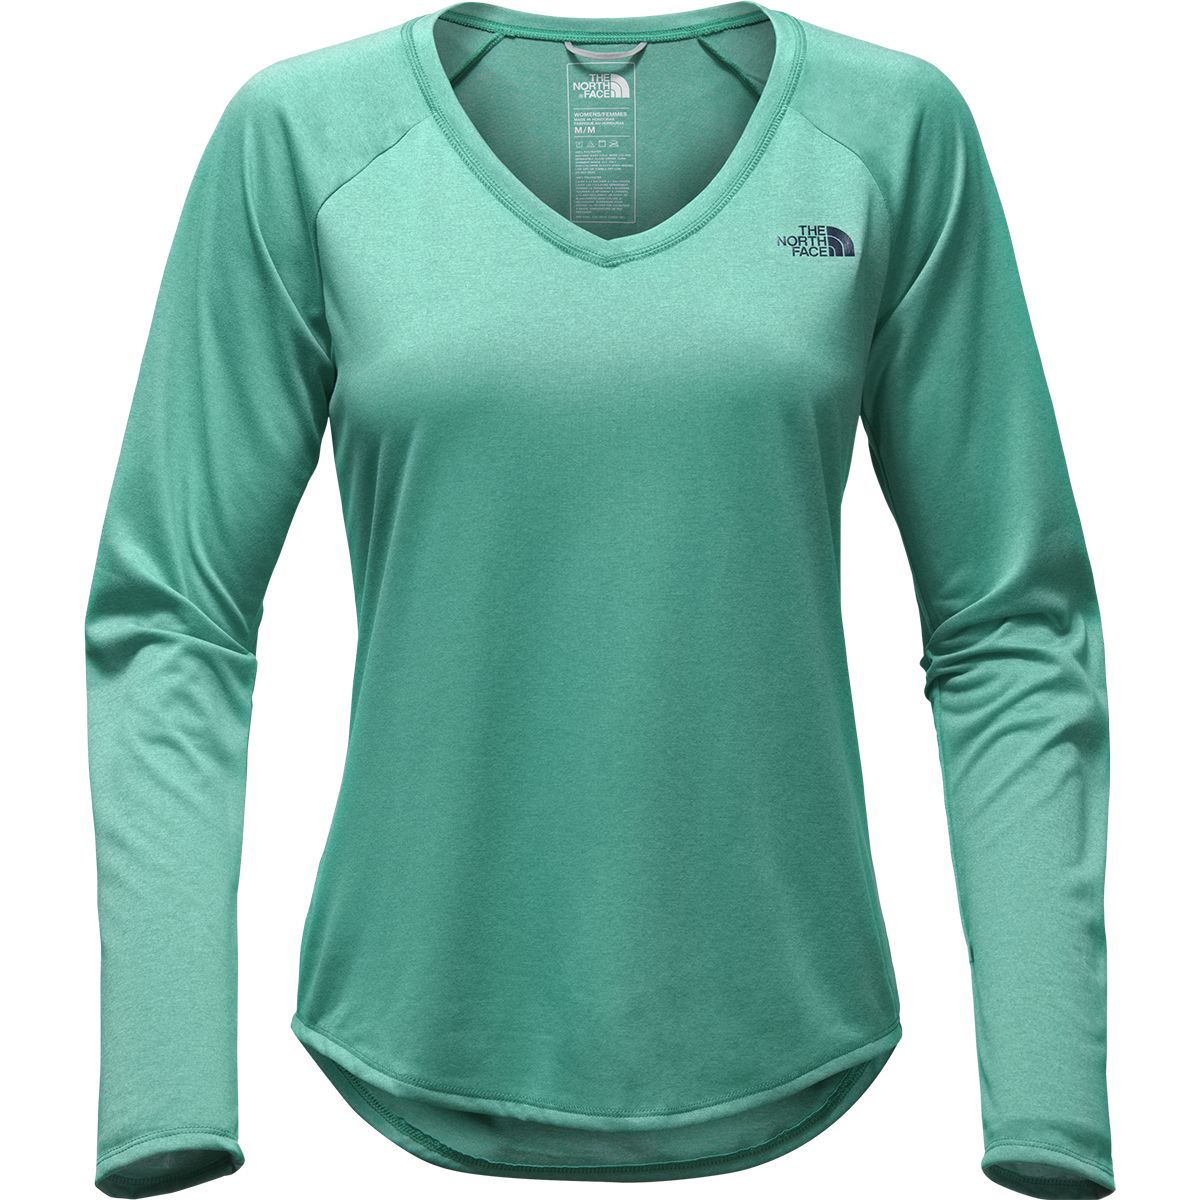 The North Face LFC Reaxion Amp T-Shirt - Women\'s - Hike & Camp